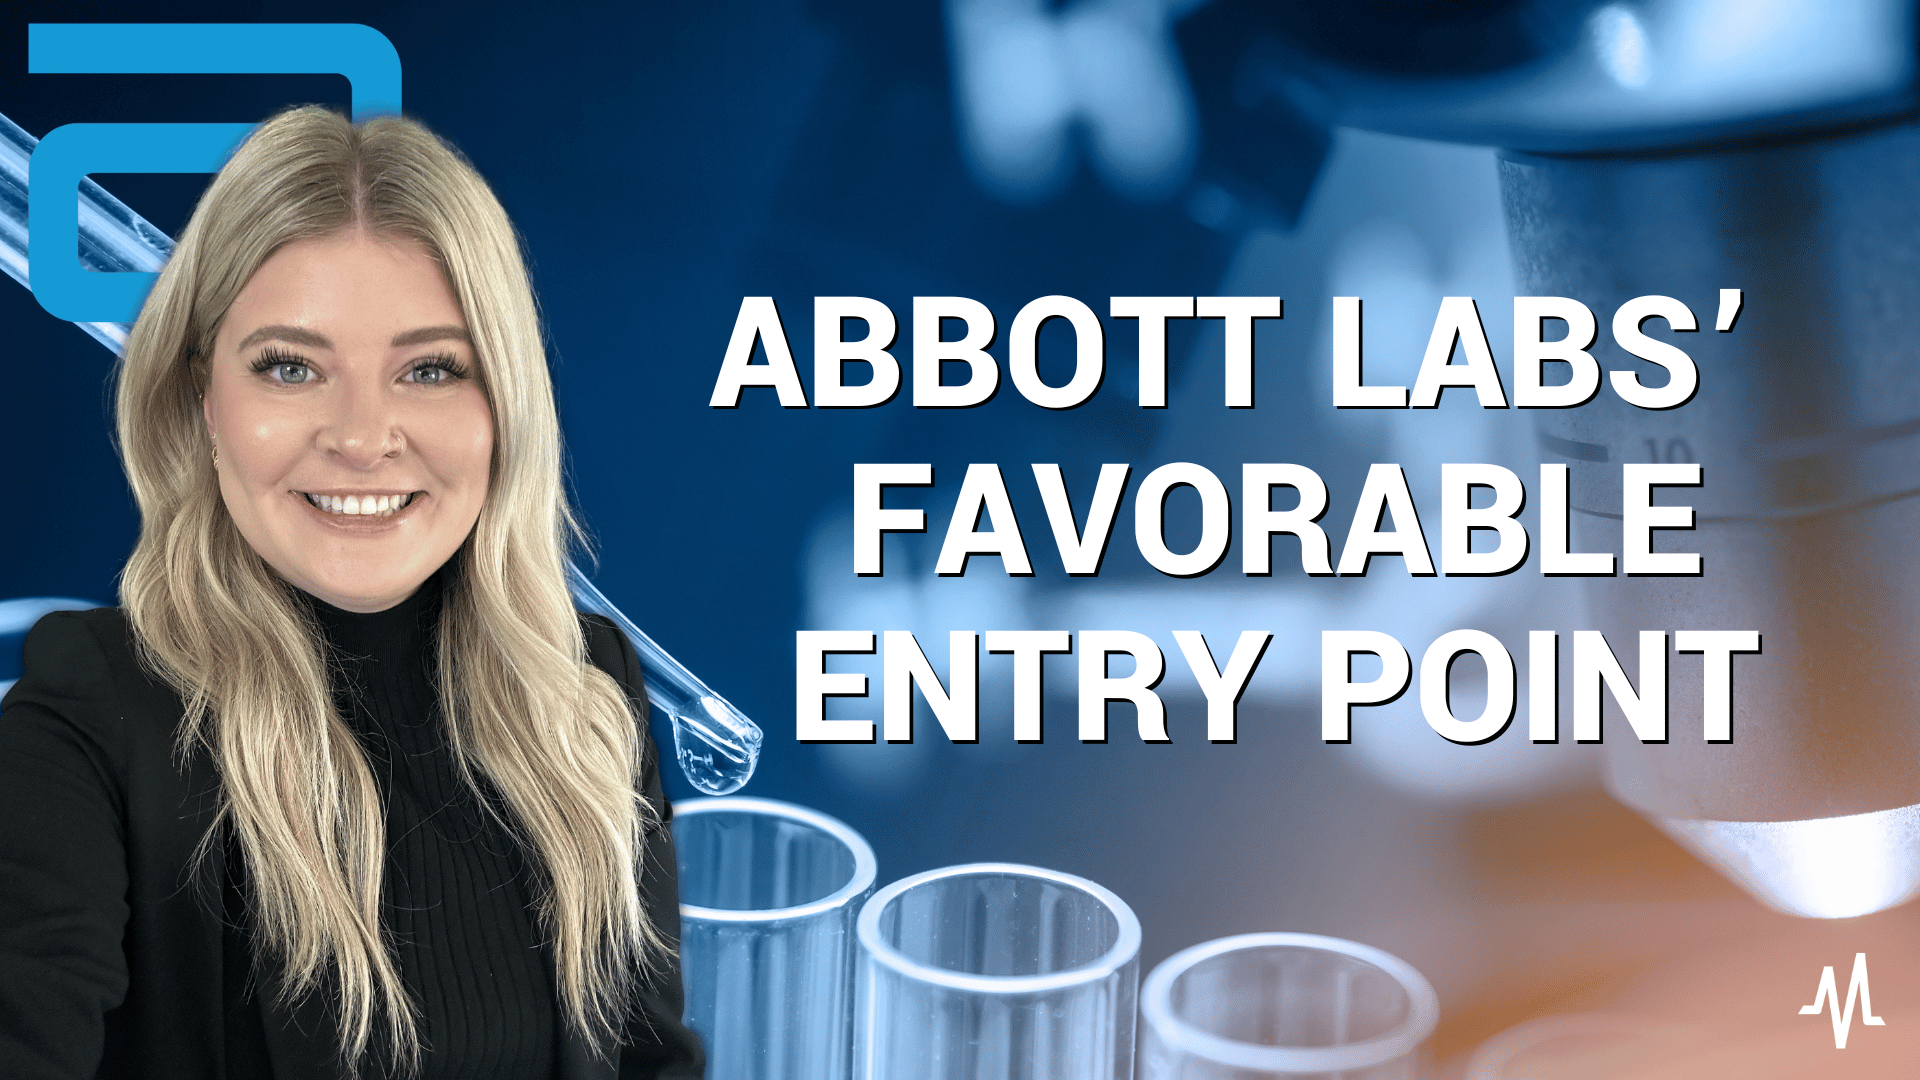 Abbott Labs Stock Offers Favorable Entry Point